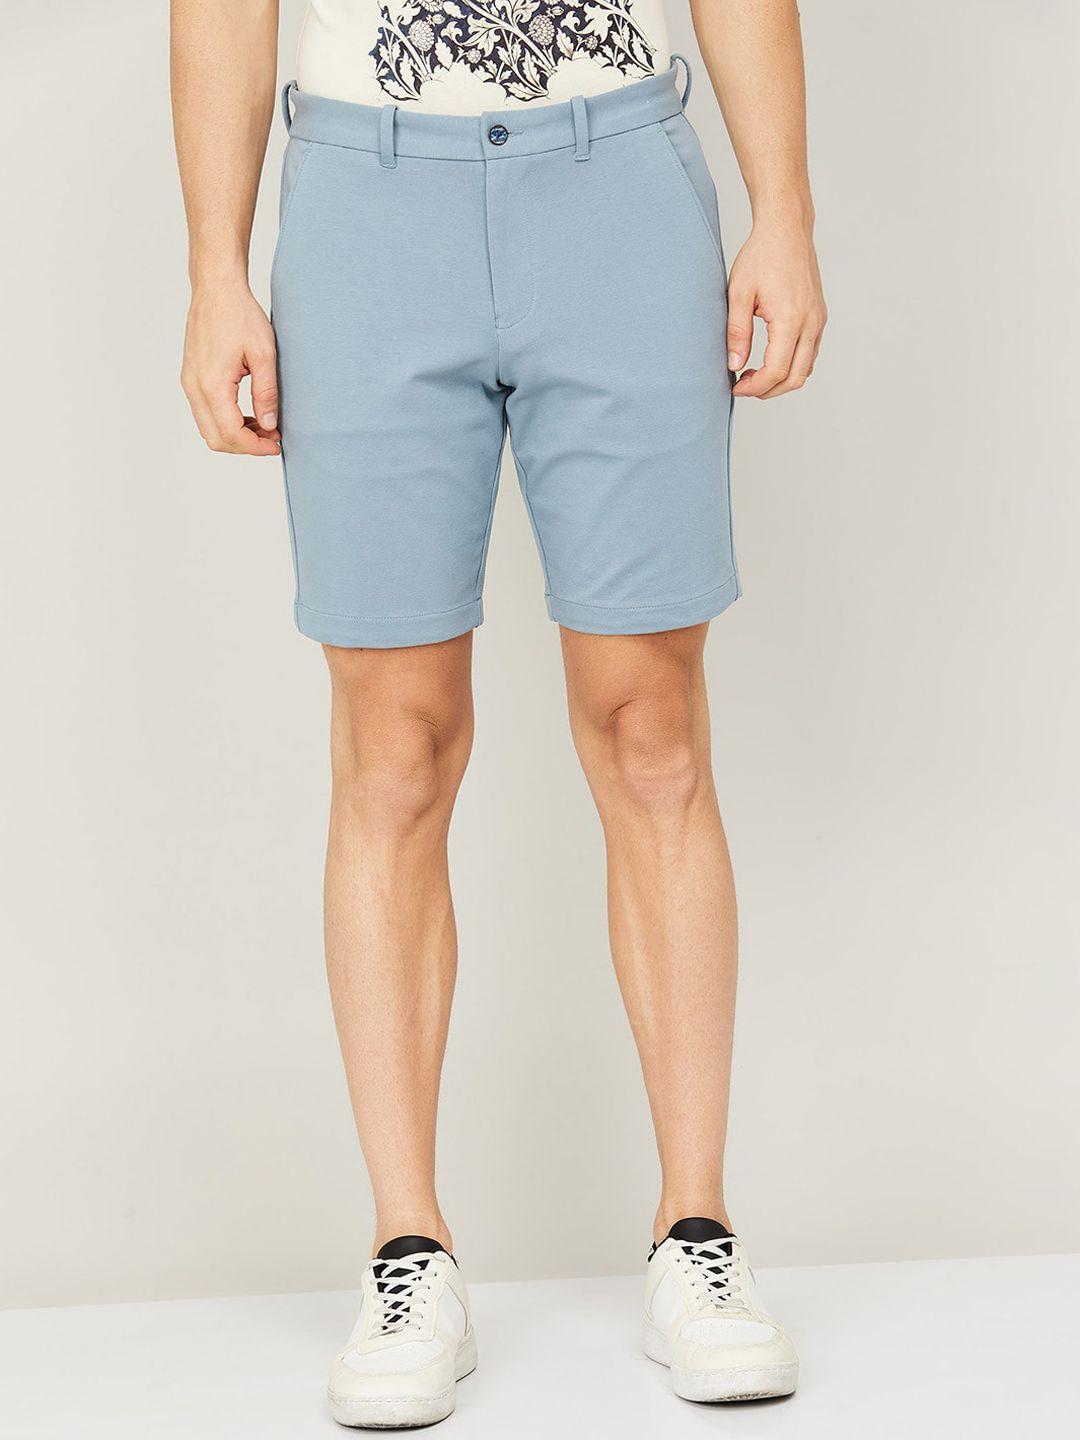 code by lifestyle men mid-rise above knee shorts